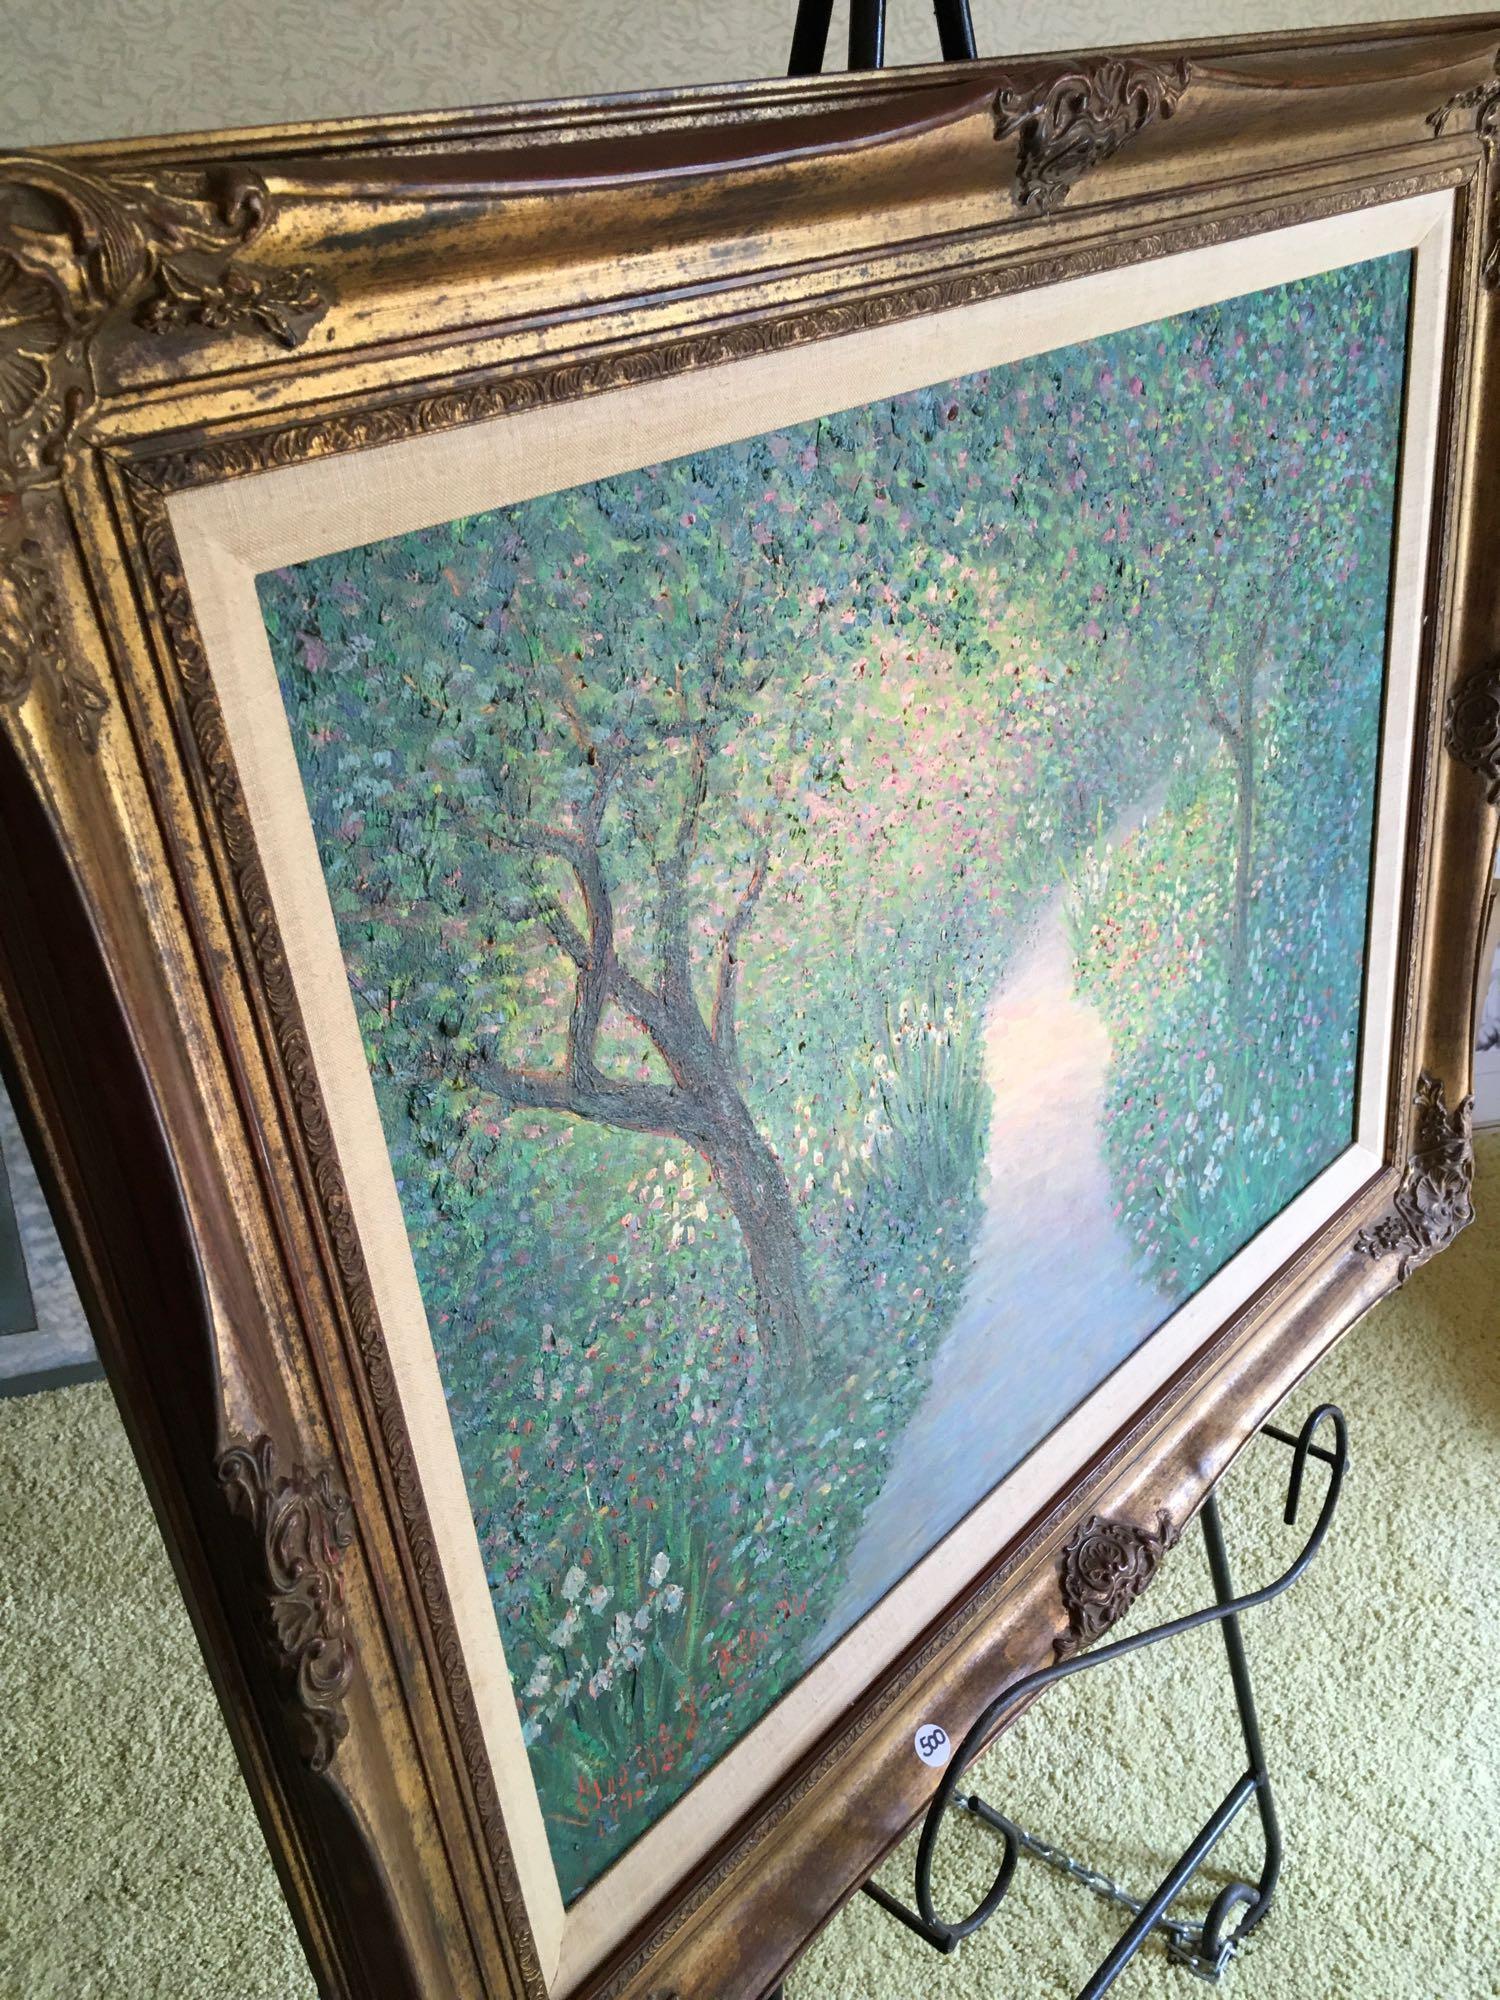 Signed George J Bleich 1992, Oil on canvas, framed art, approximately 30" x 30"